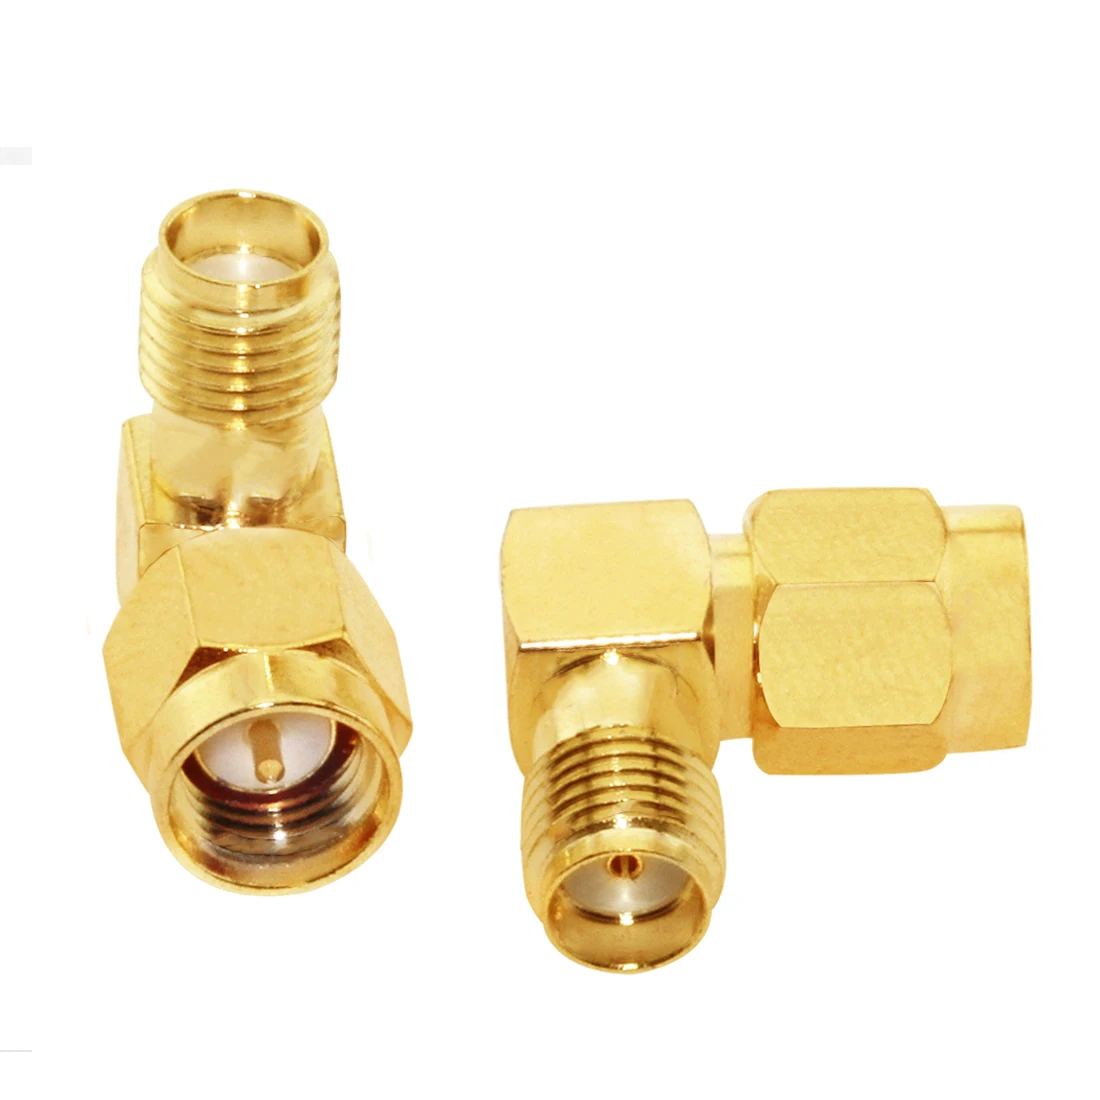 1pc SMA Male Plug to Female Jack  RF Coax Adapter Modem Convertor Connector Right  Angle Goldplated NEW Wholesale